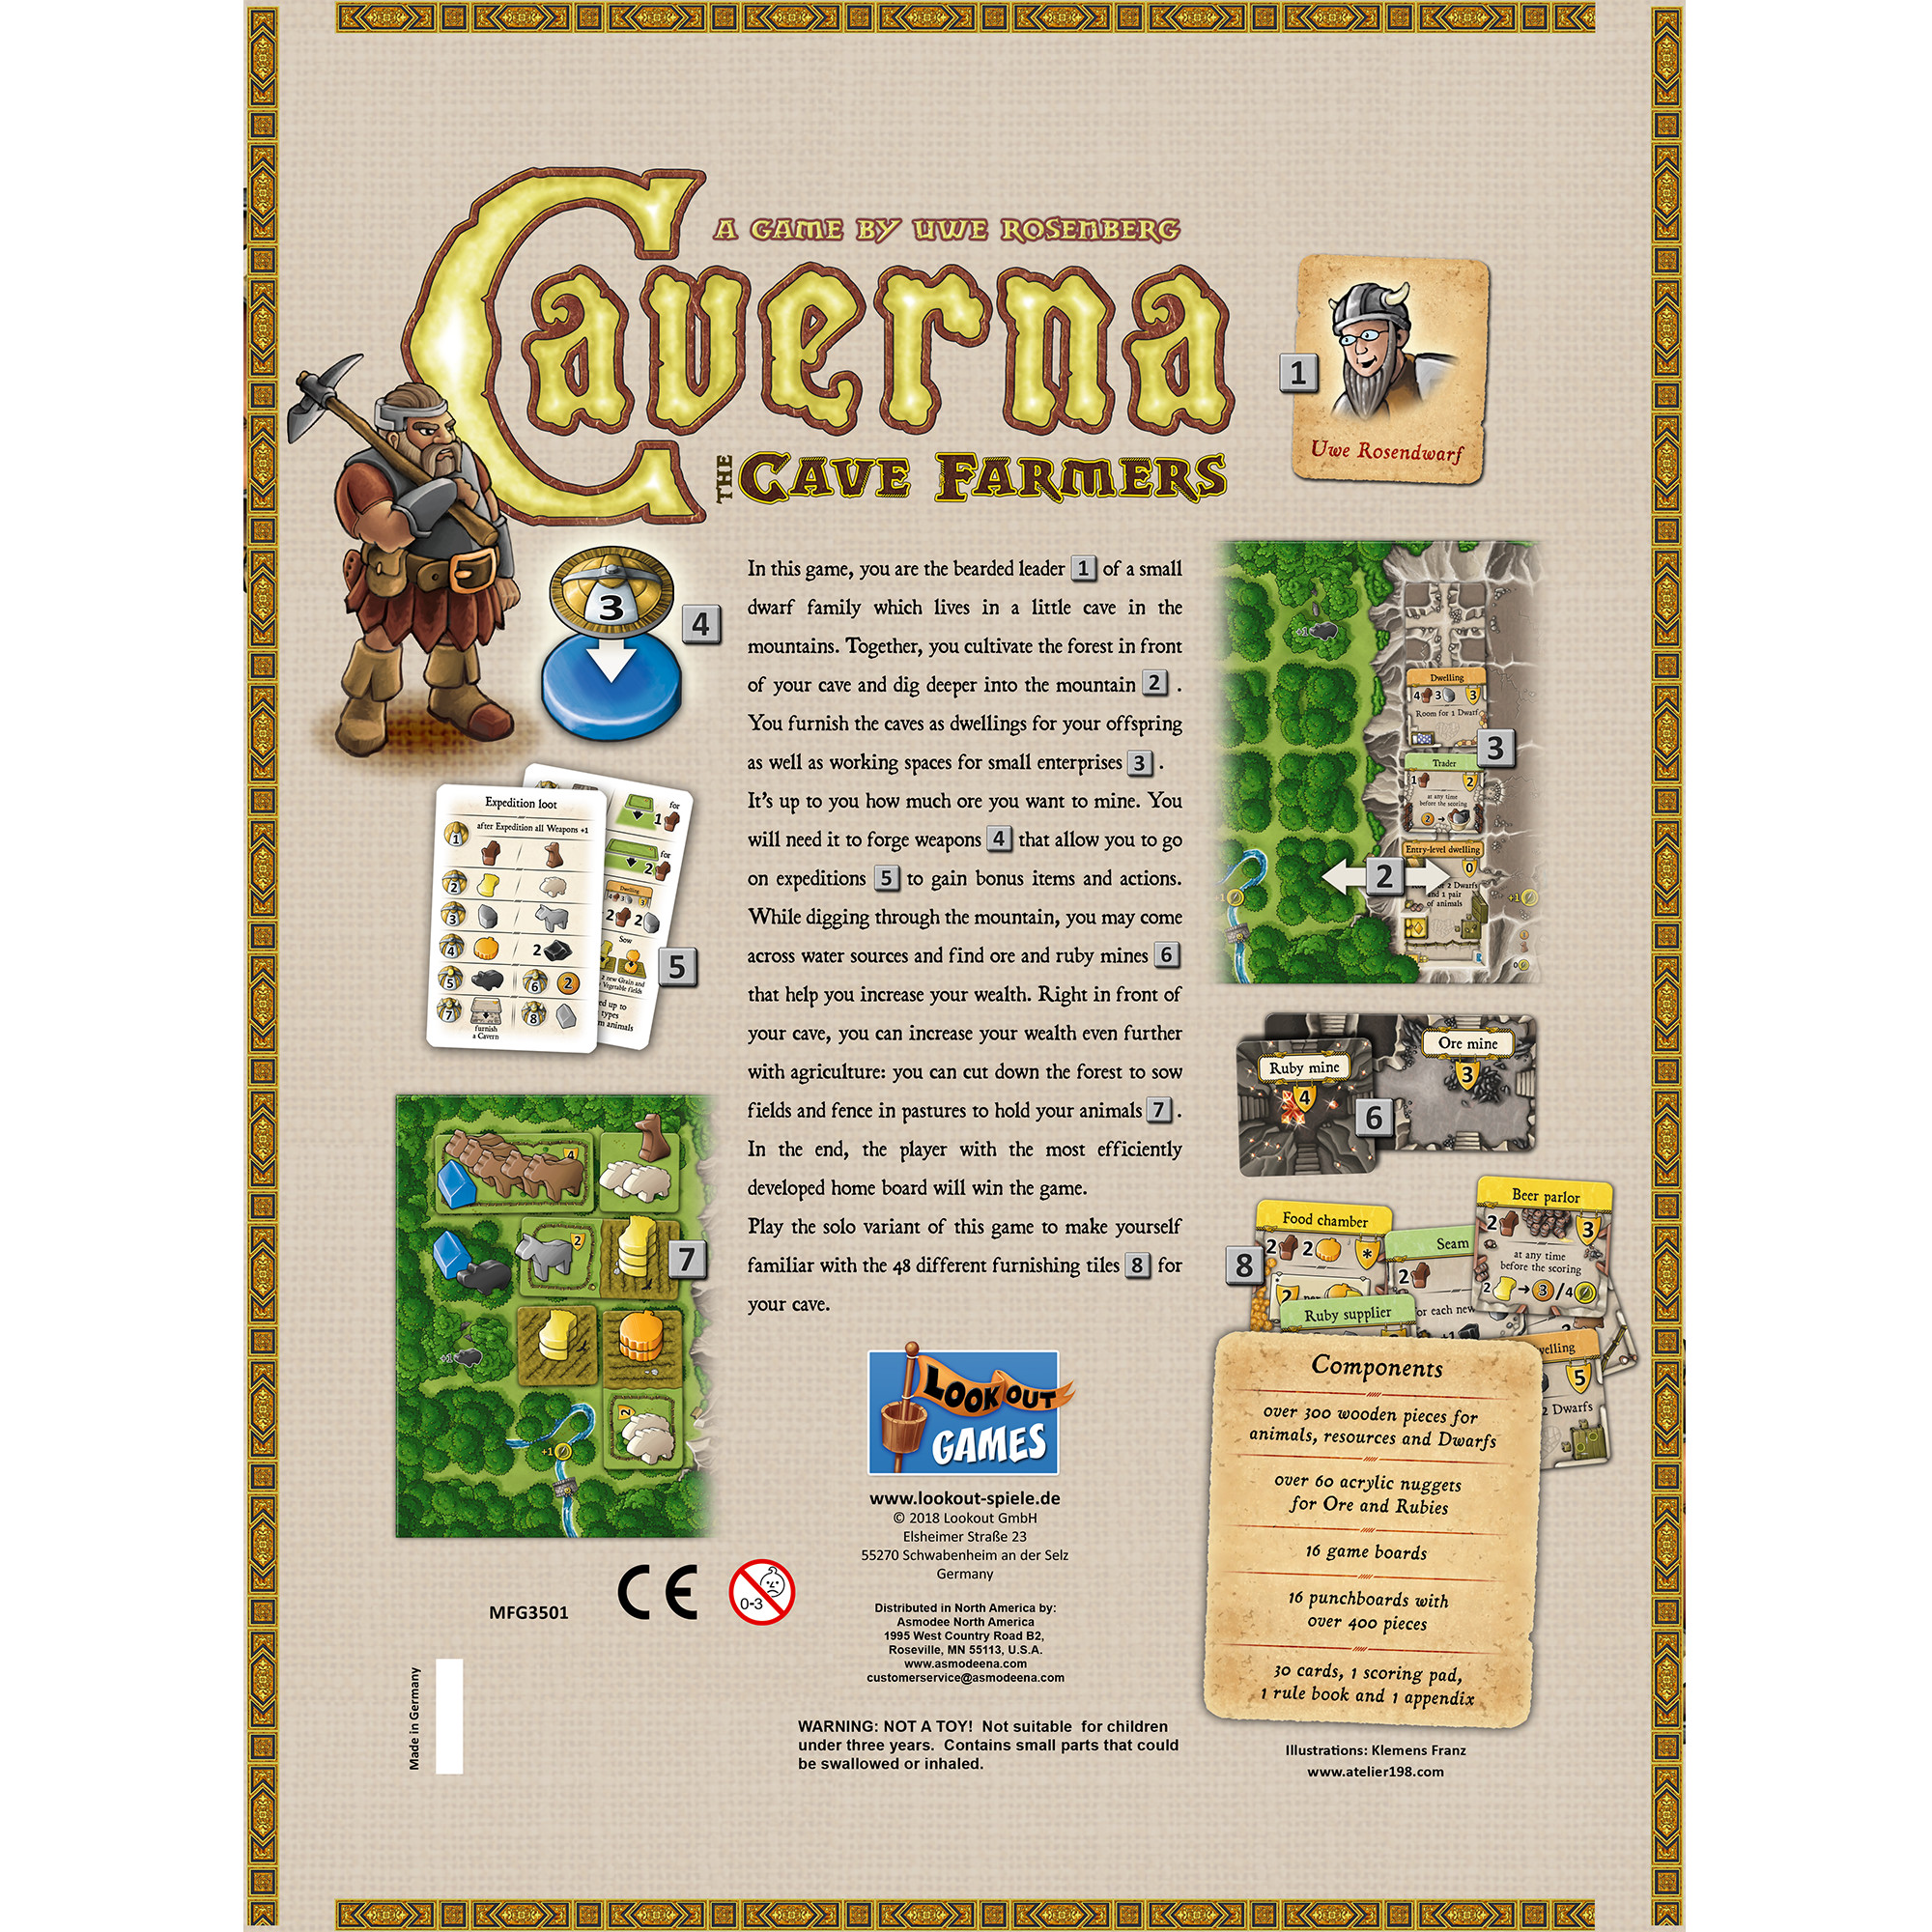 Caverna: The Cave Farmers Strategy Board Game for ages 12 and up, from Asmodee - image 2 of 5